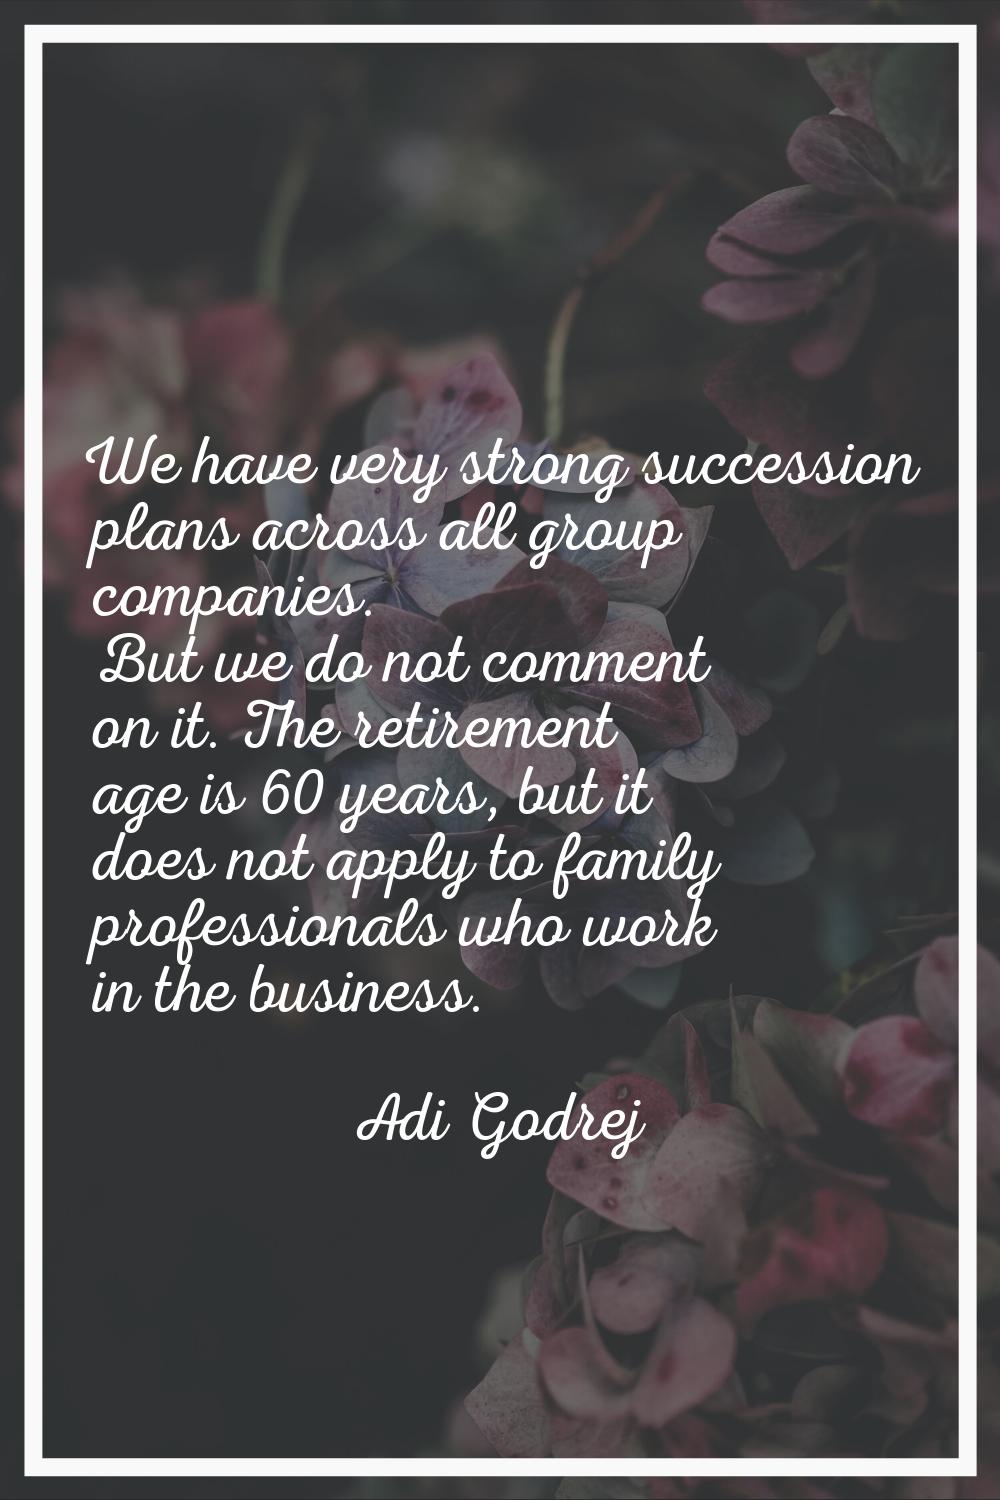 We have very strong succession plans across all group companies. But we do not comment on it. The r